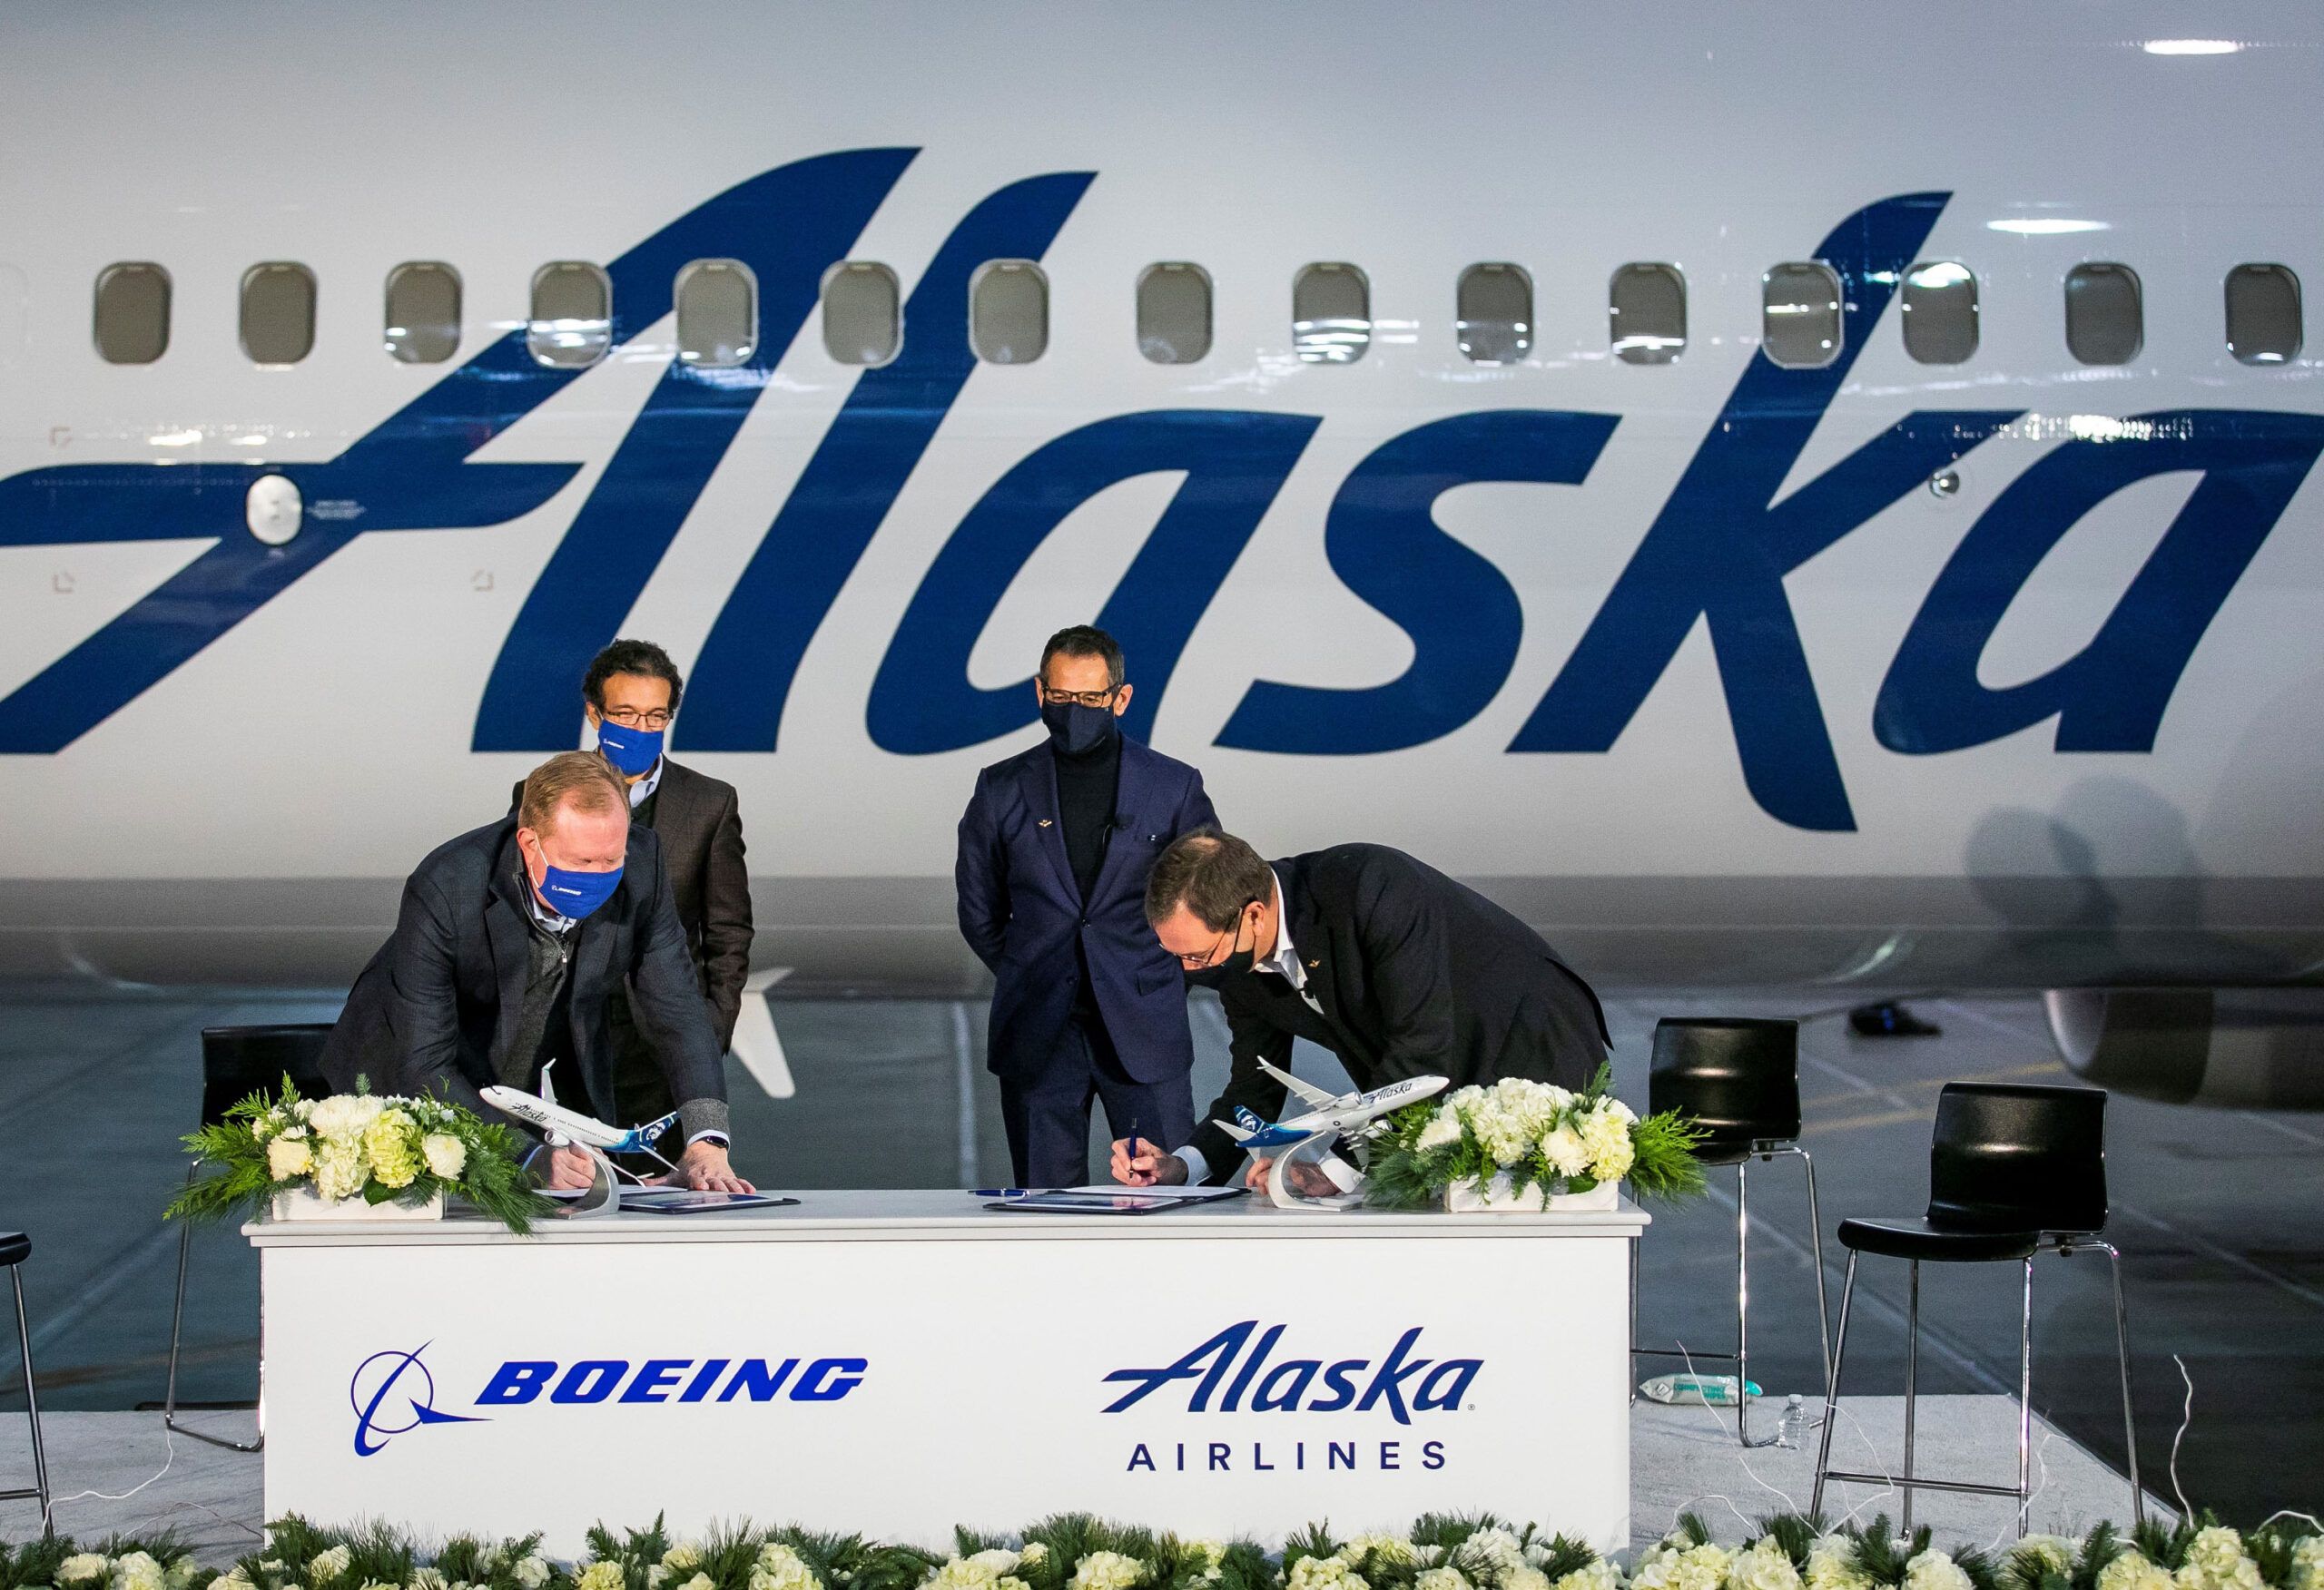 Alaska and Boeing signing acceptance of 737 MAX jets in front of a 737 MAX